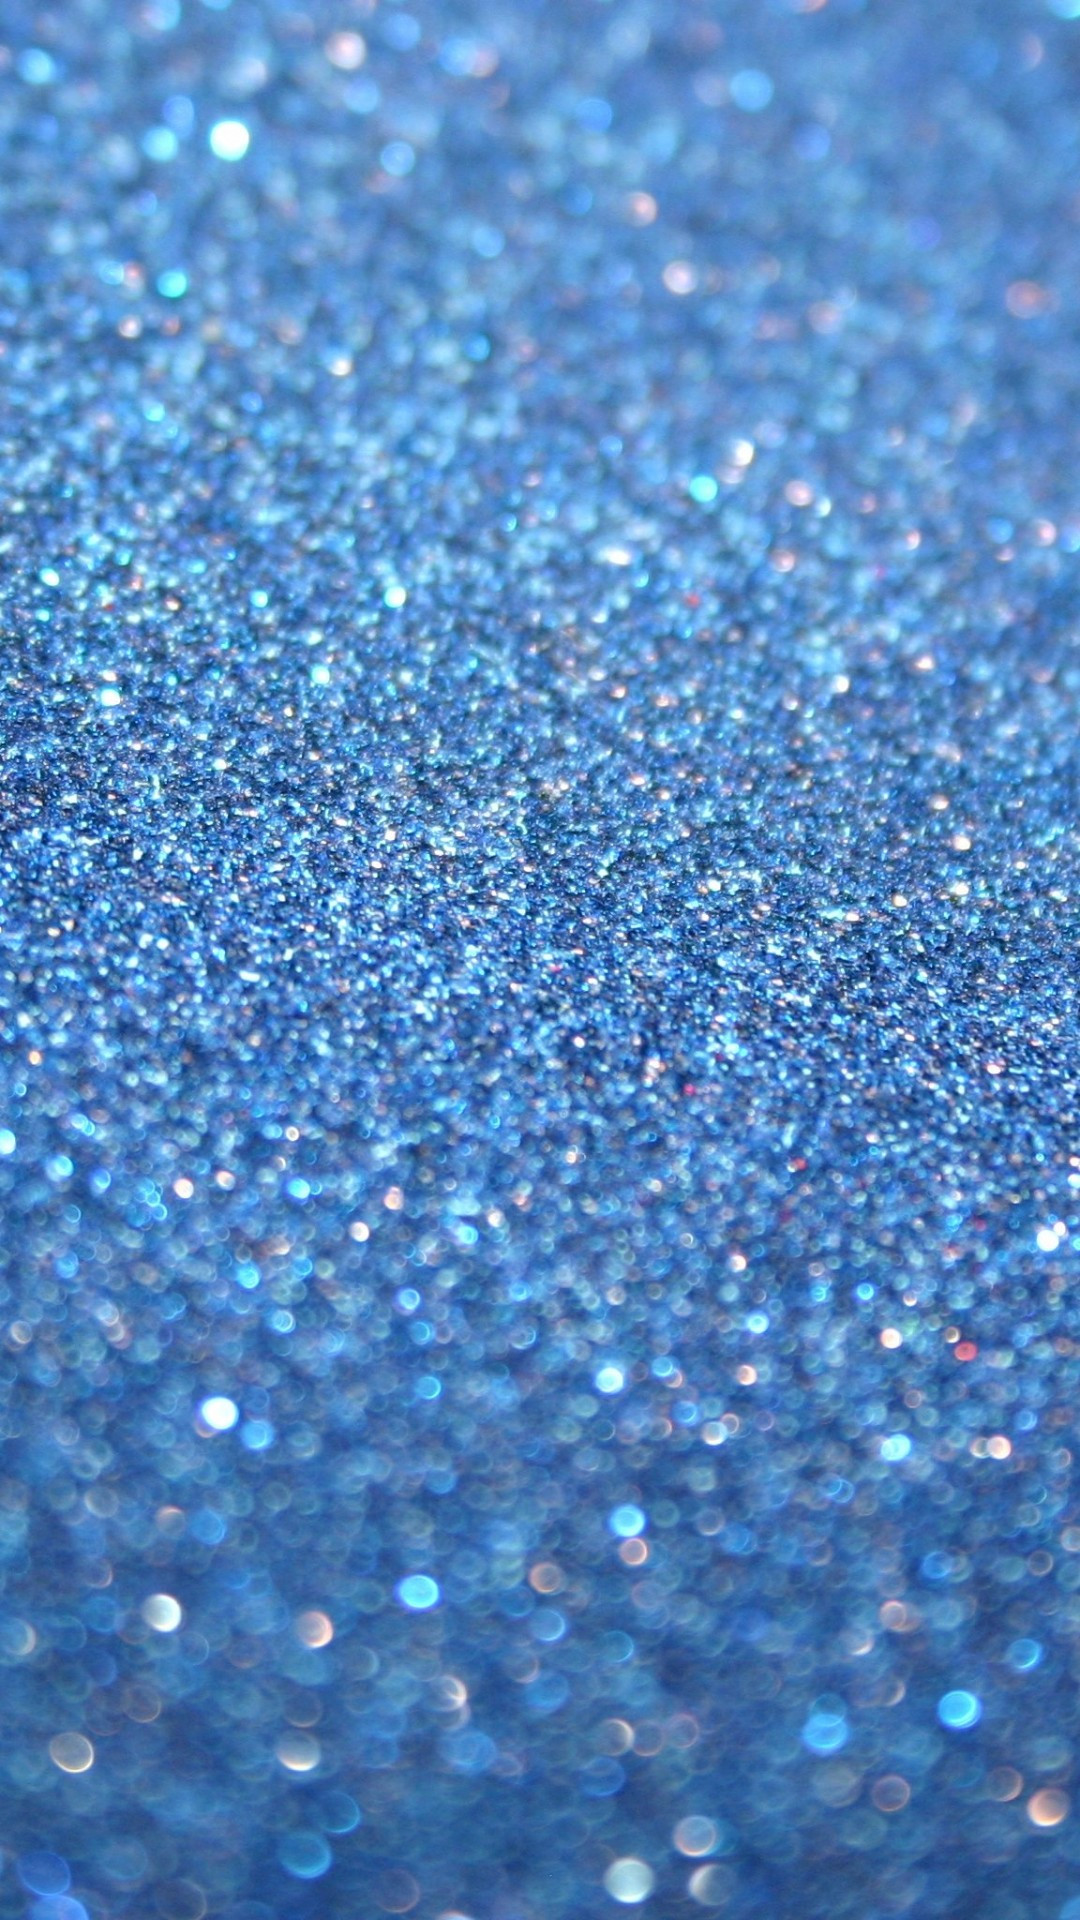 Glitter IPhone Wallpaper (79+ images)